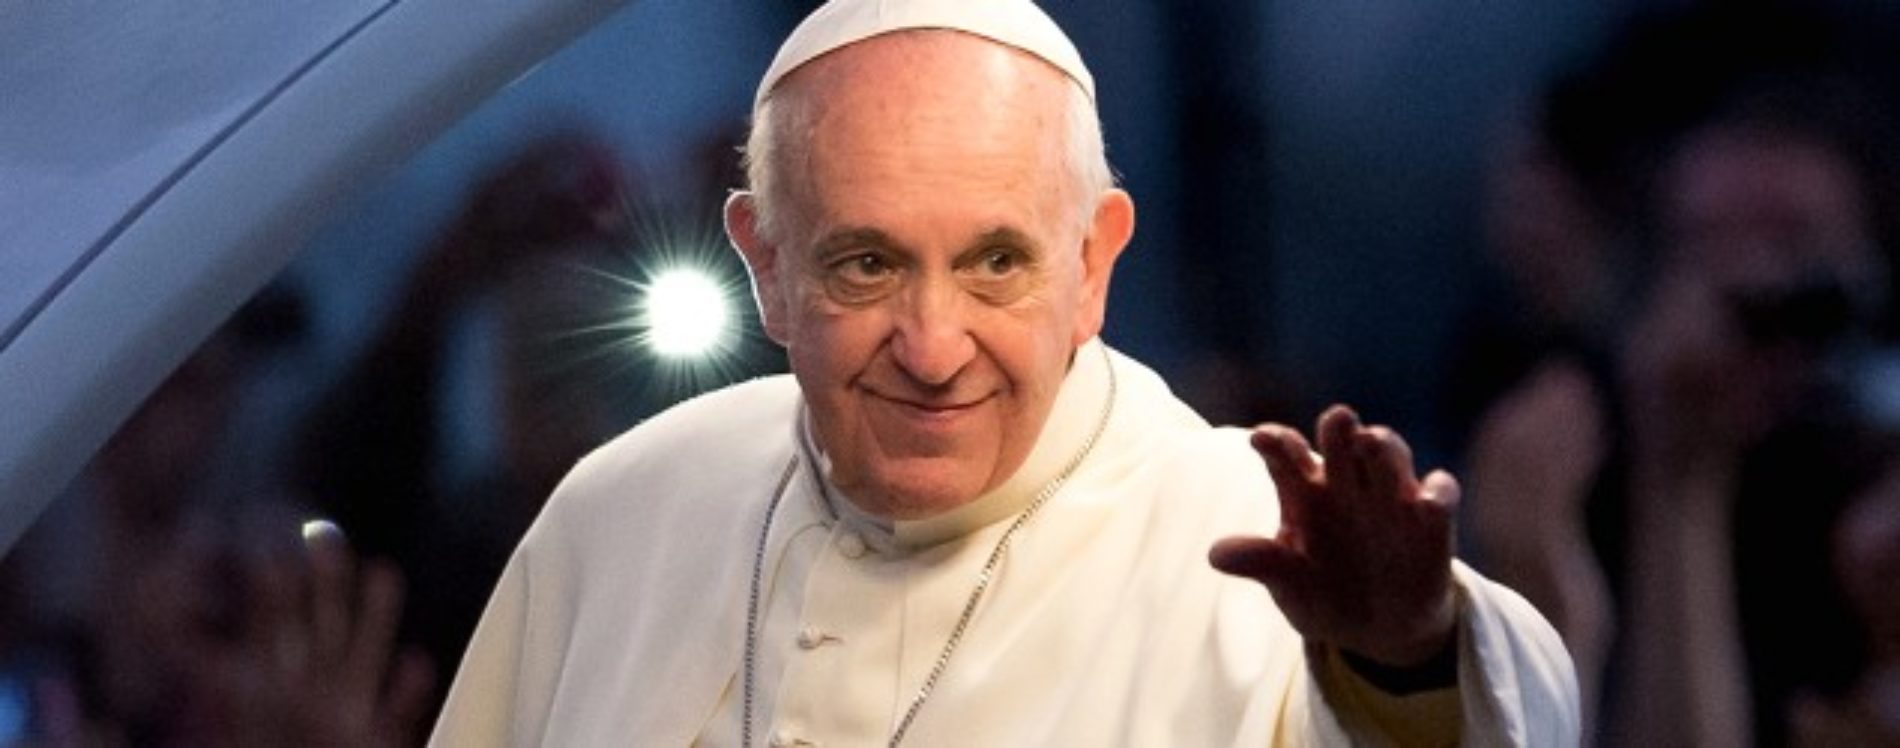 Vatican plotters planted fake brain tumour story to derail Pope on gay rights